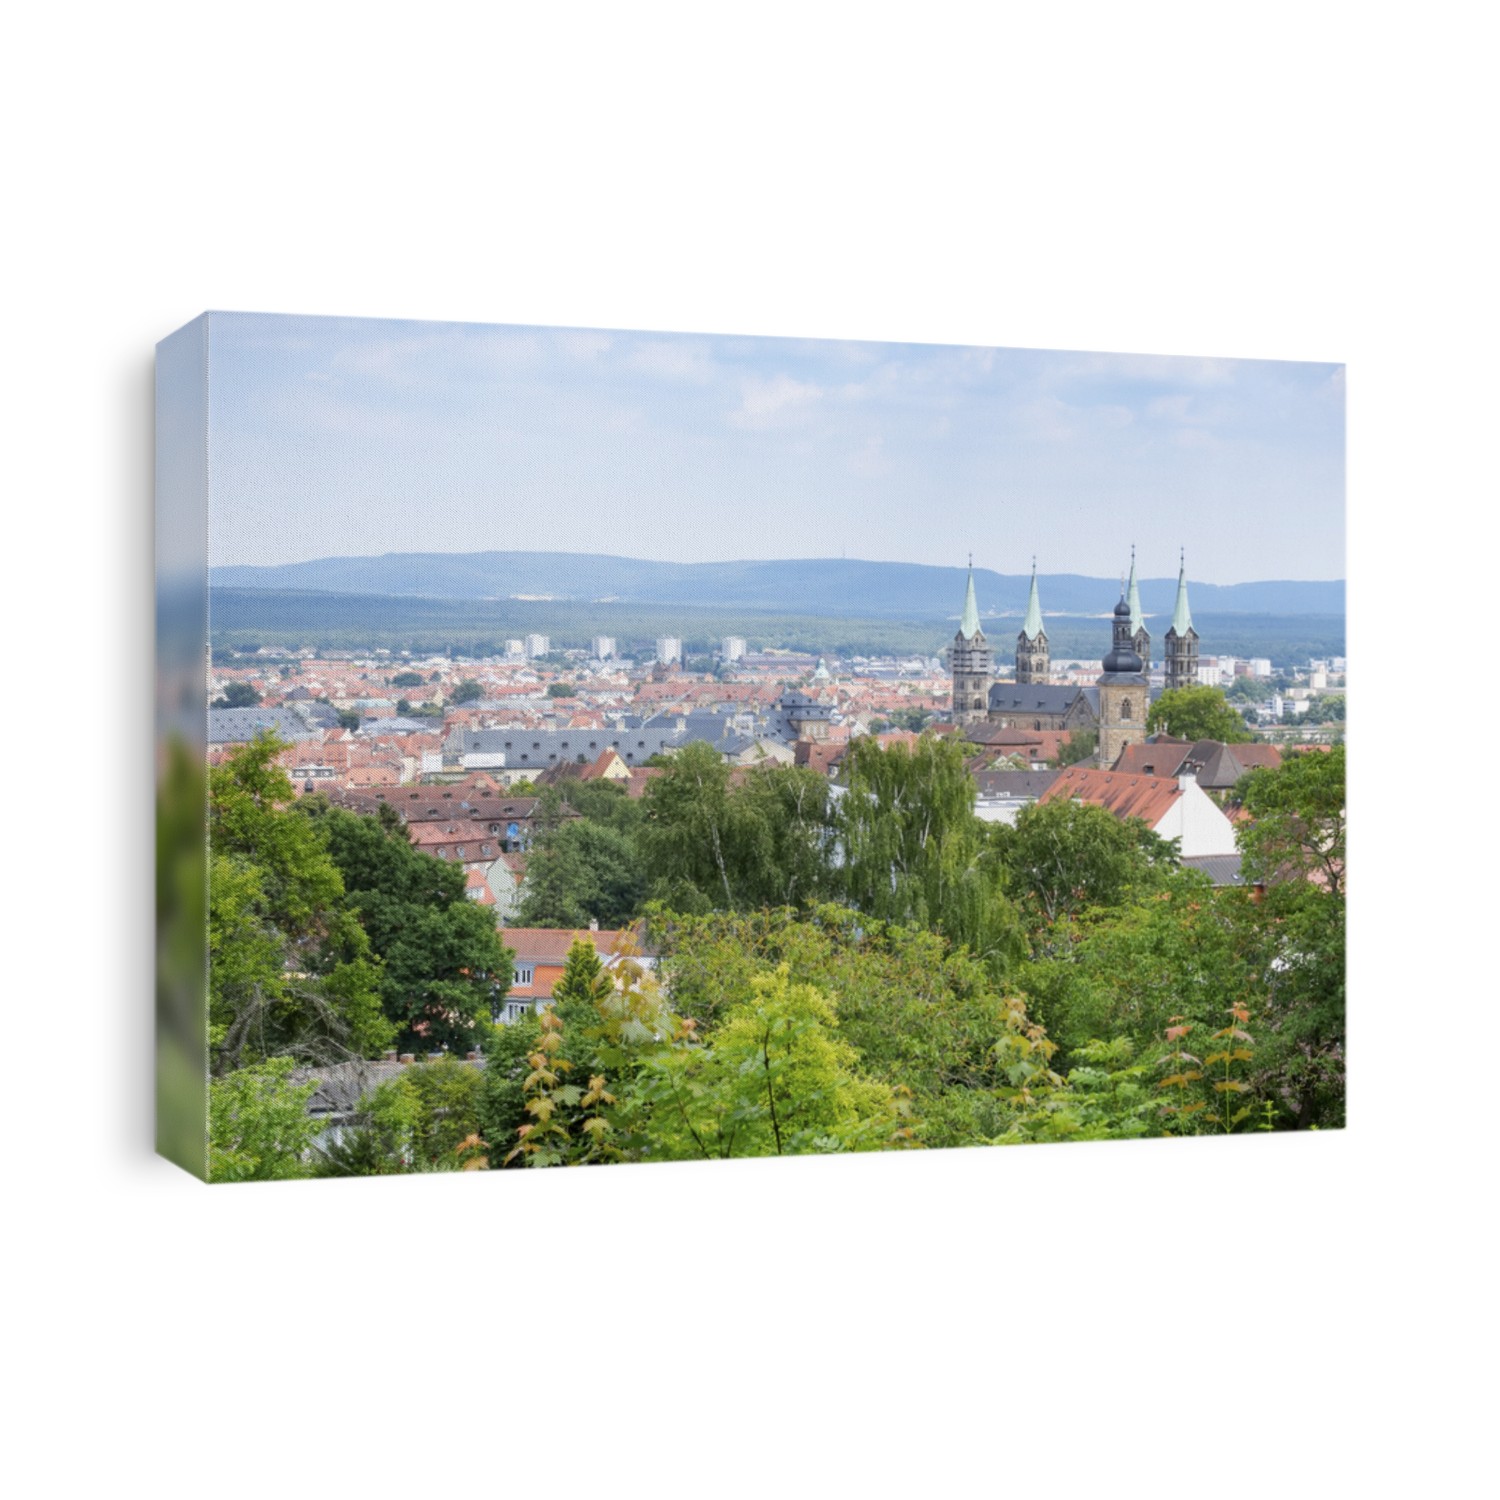 An image of a panoramic view over Bamberg Bavaria Germany